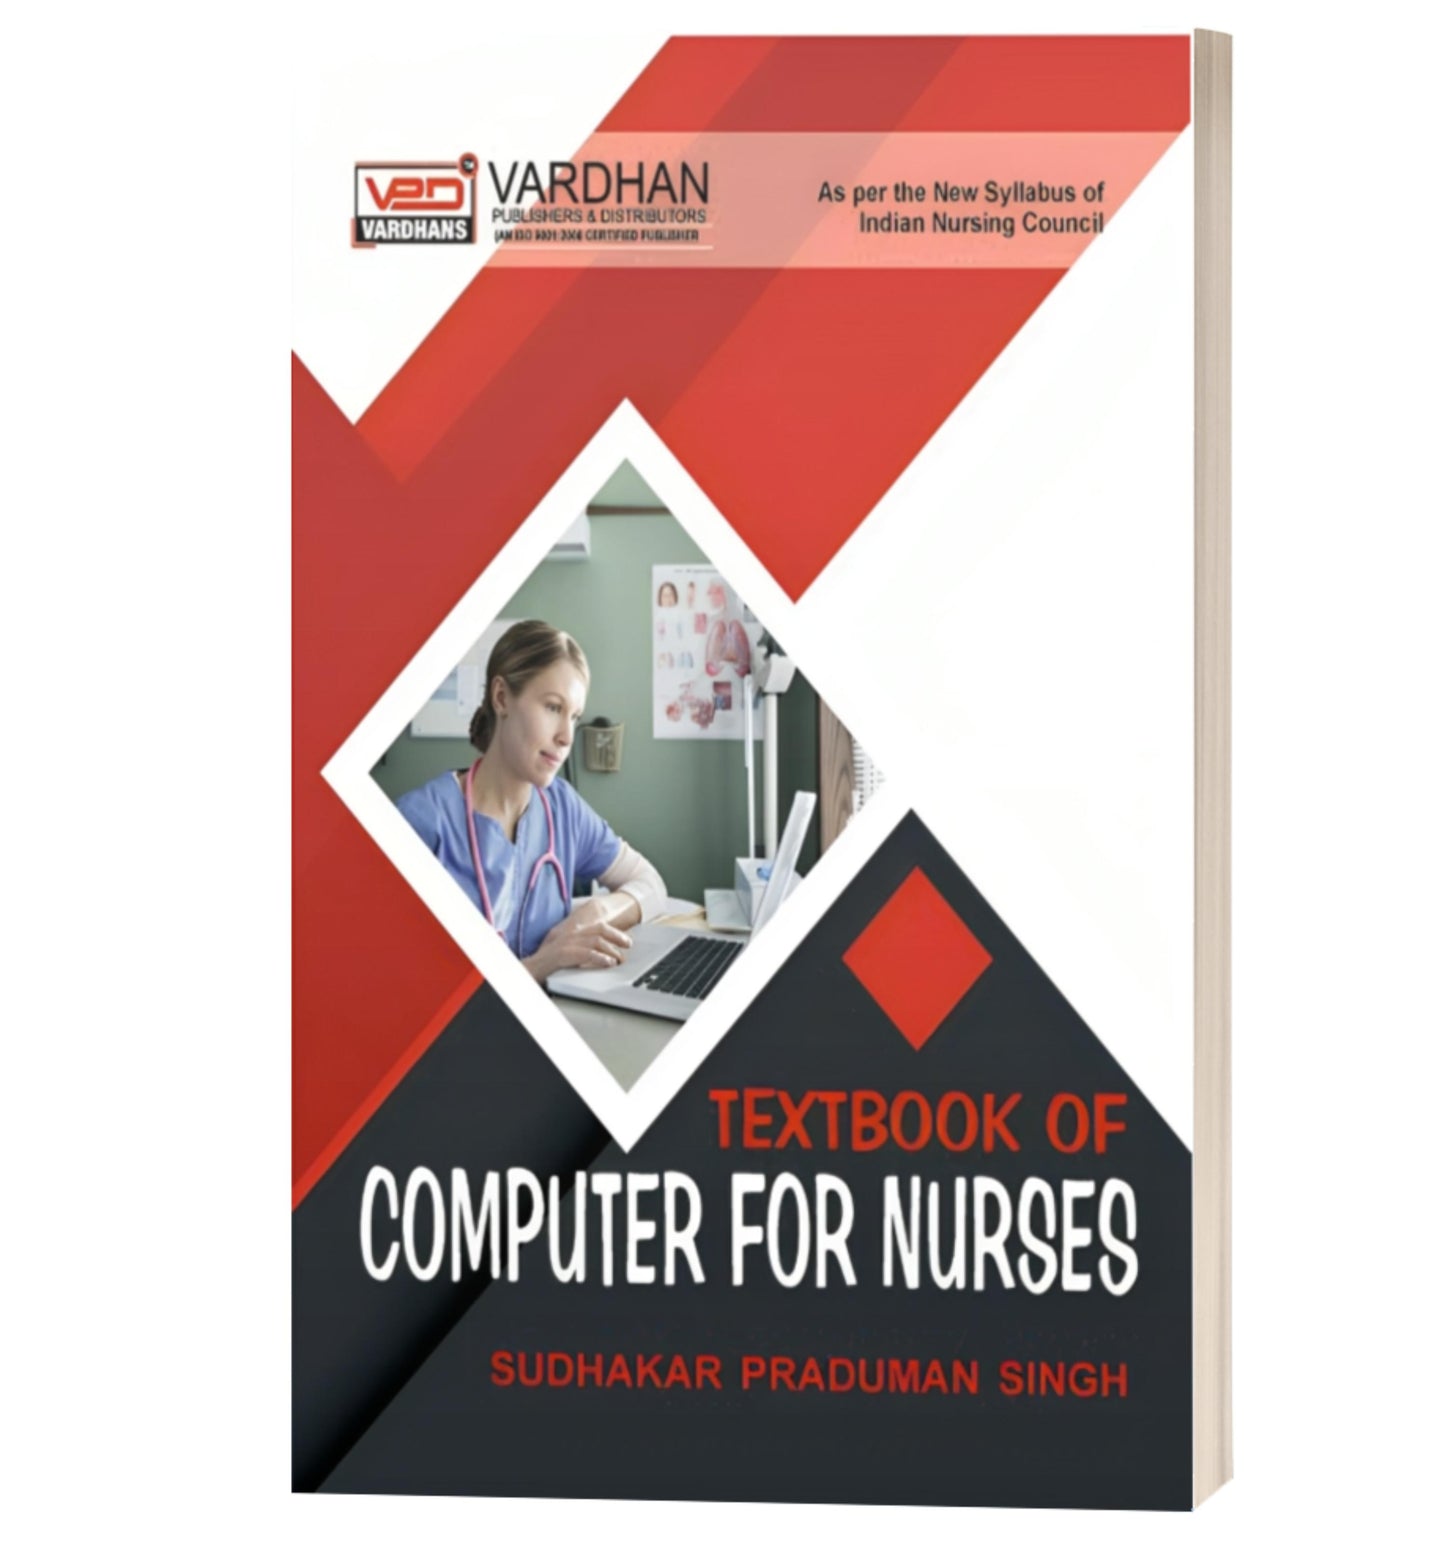 Textbook of Computer for Nurses